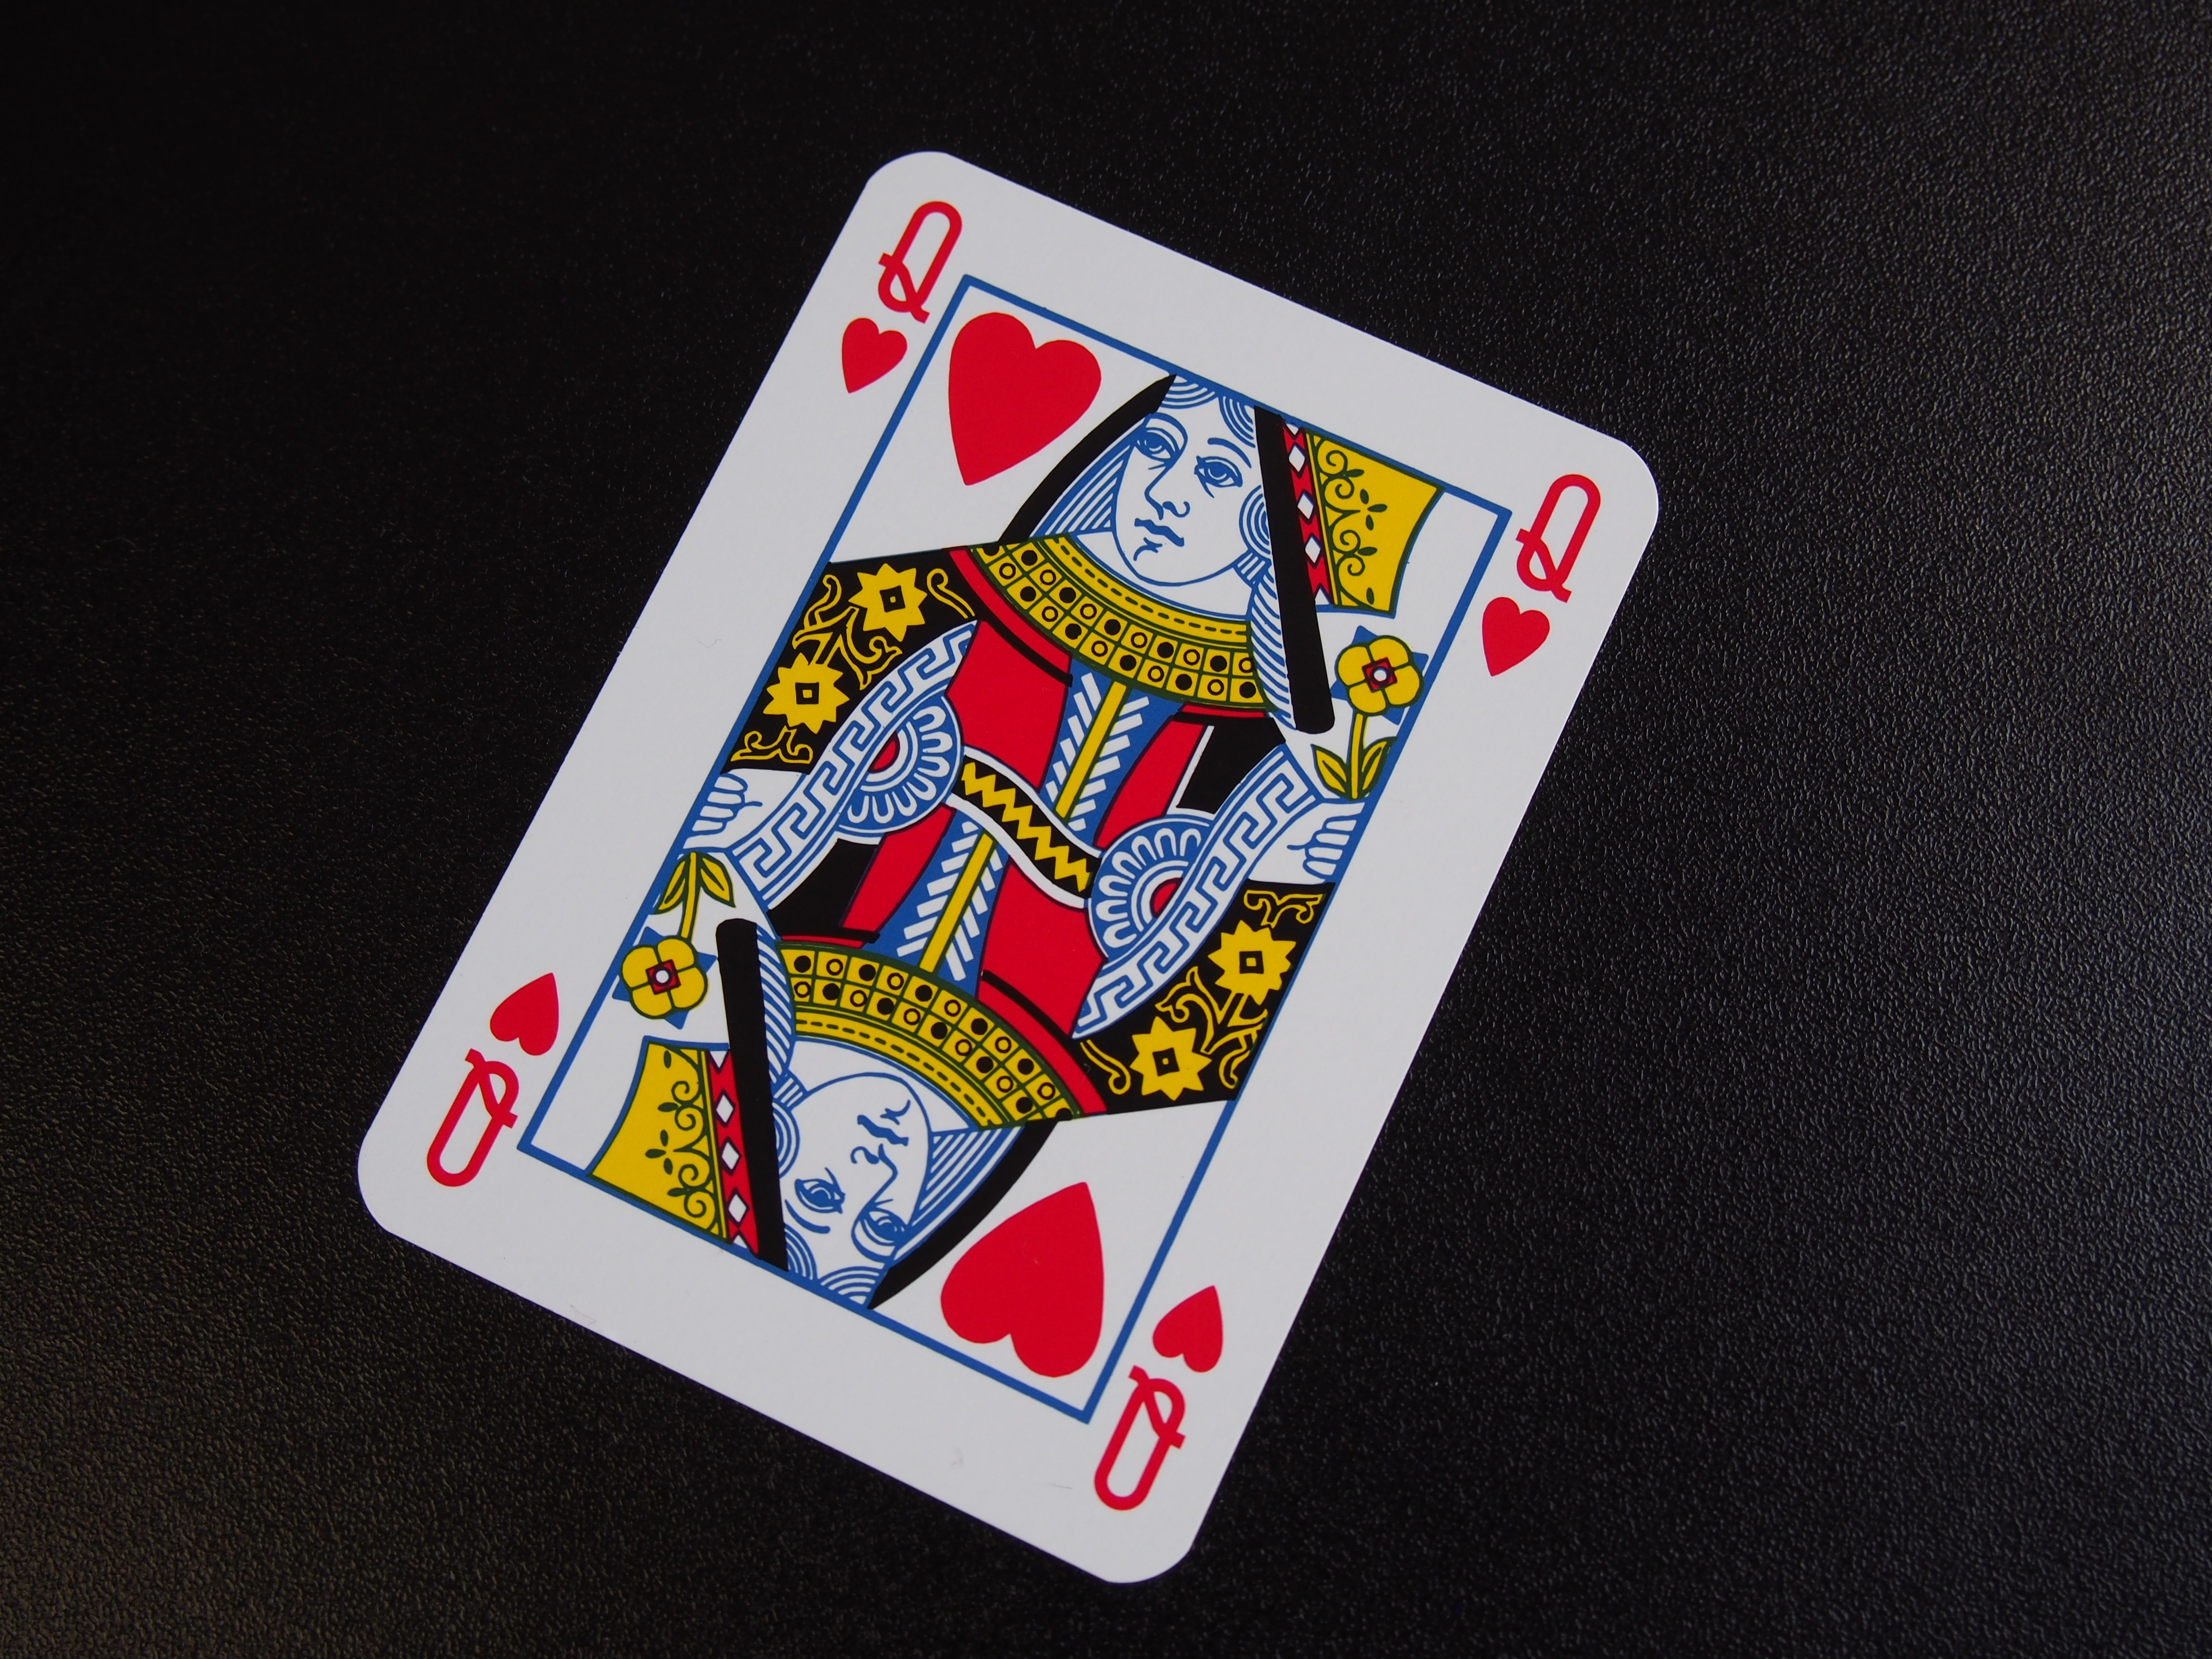 queen of hearts playing card